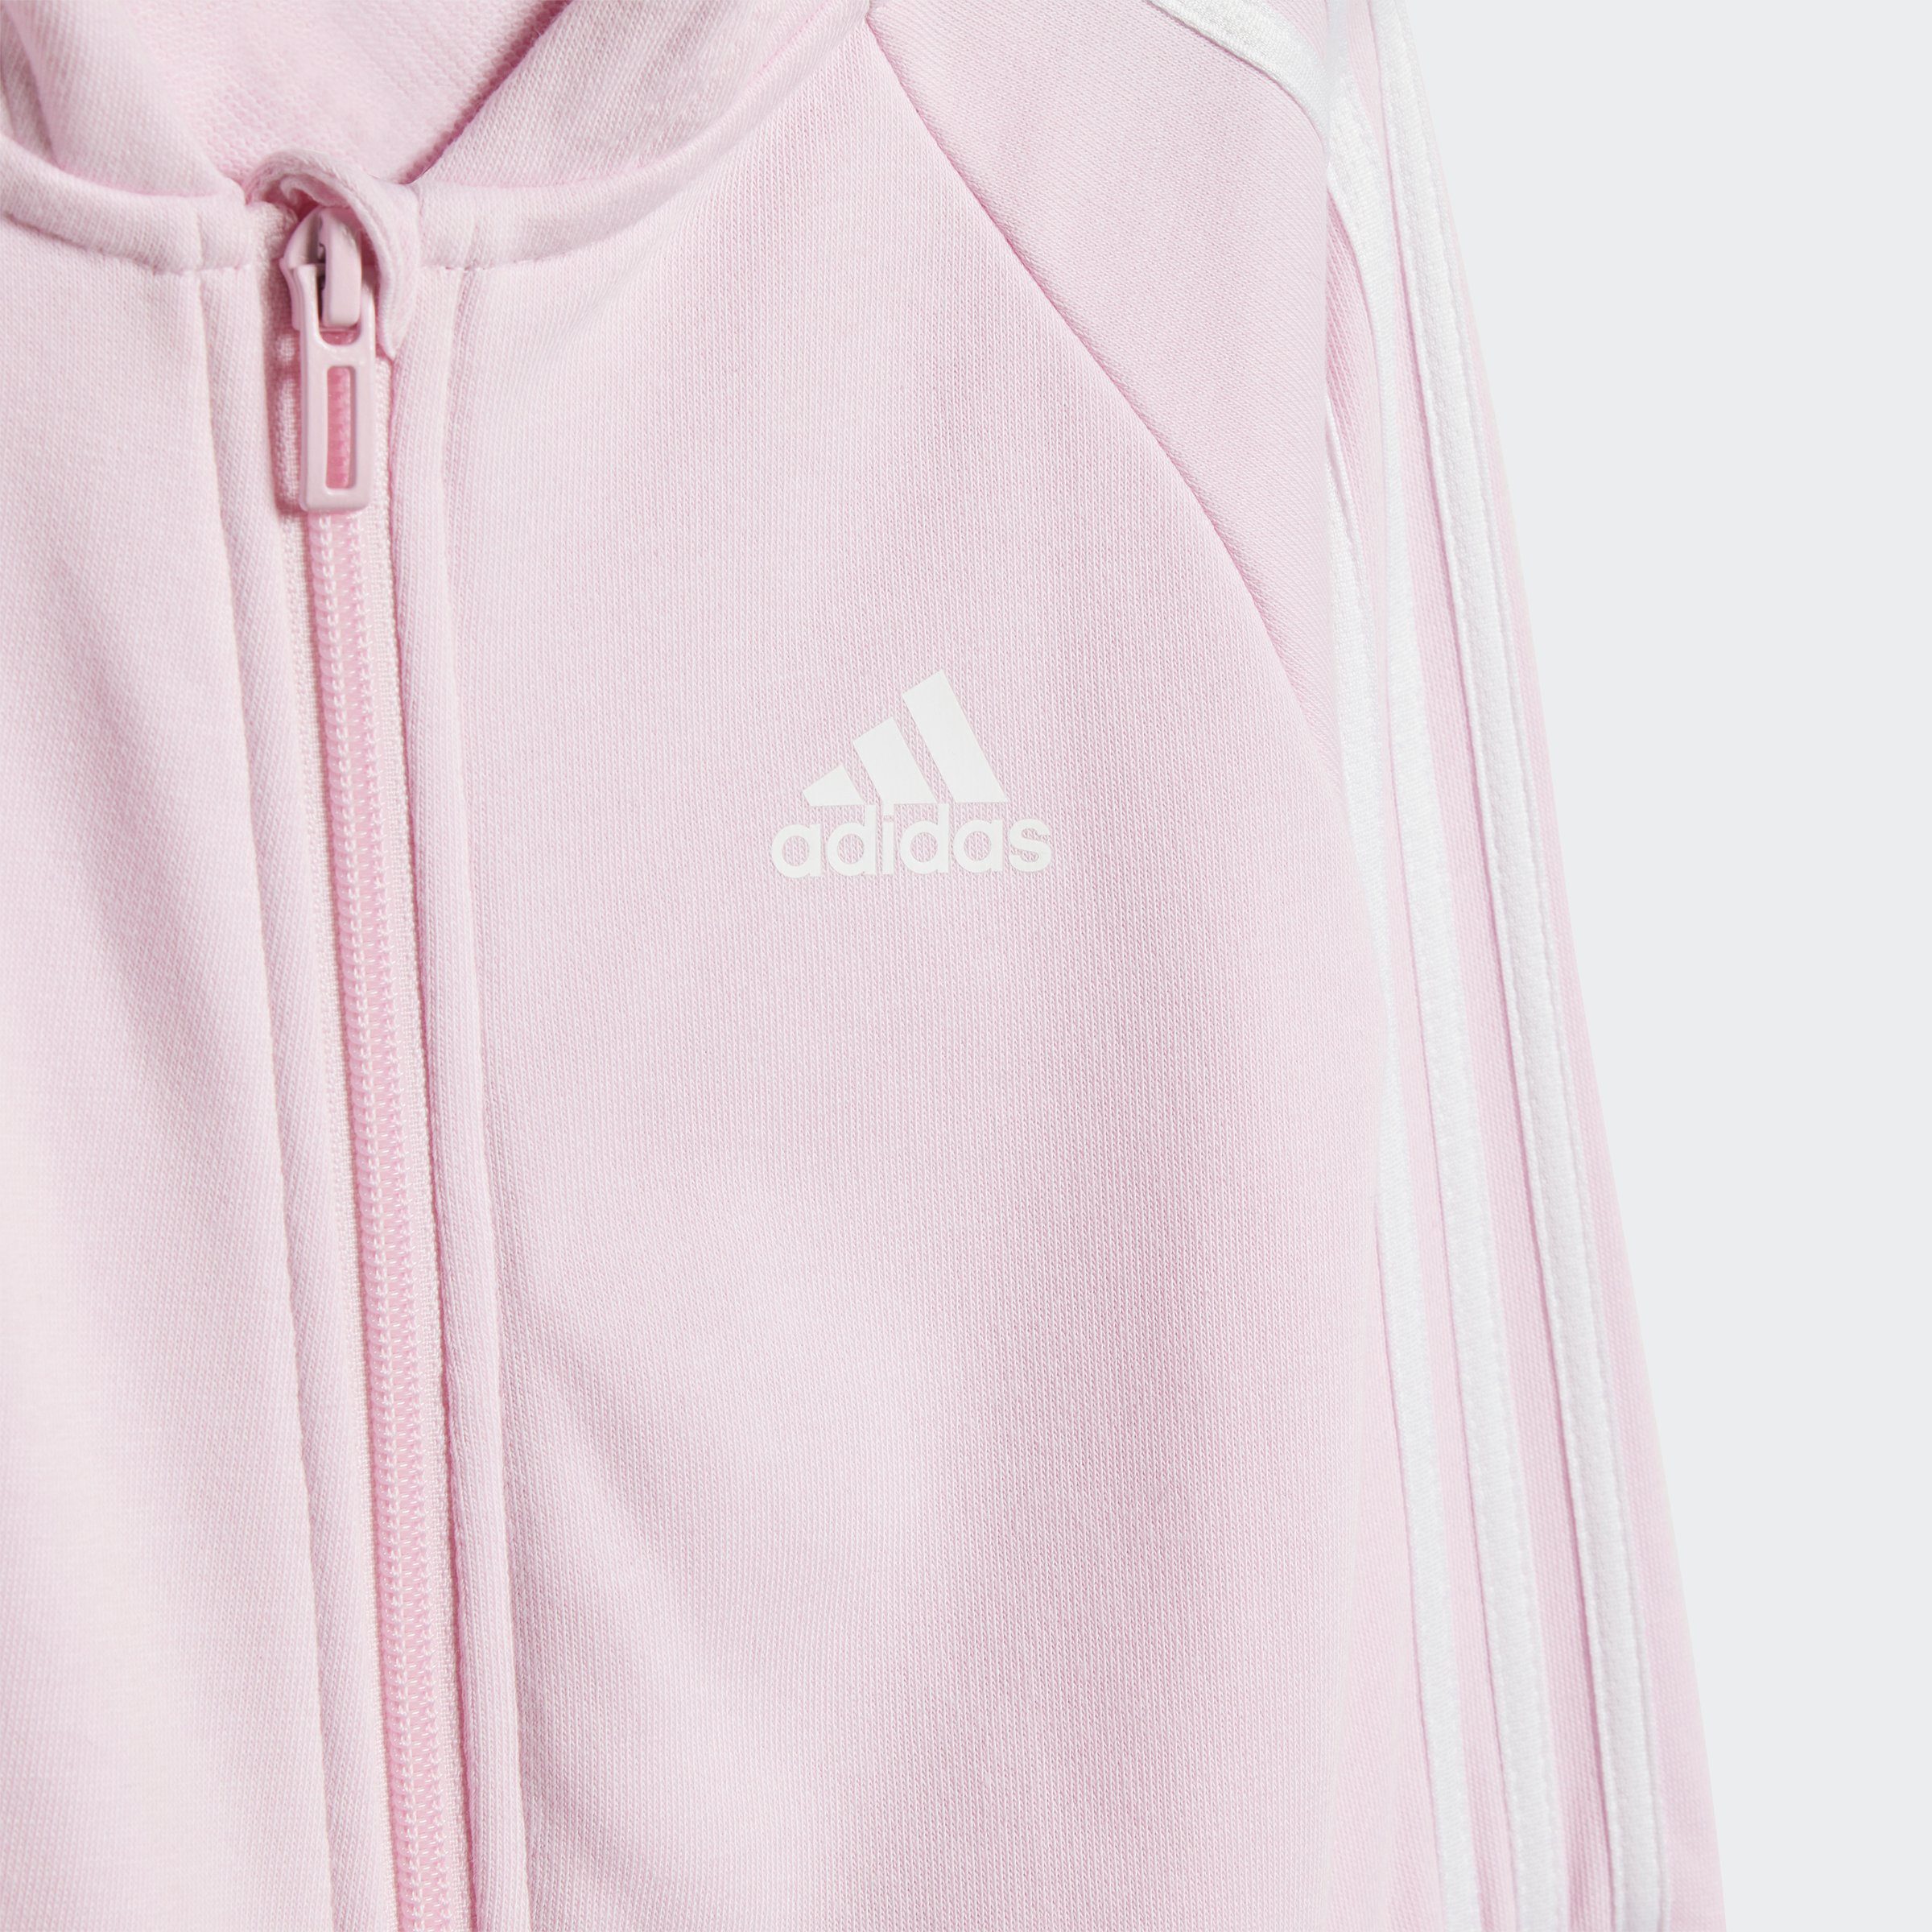 adidas Sportswear Overall Pink / White FT I ONESIE Clear 3S